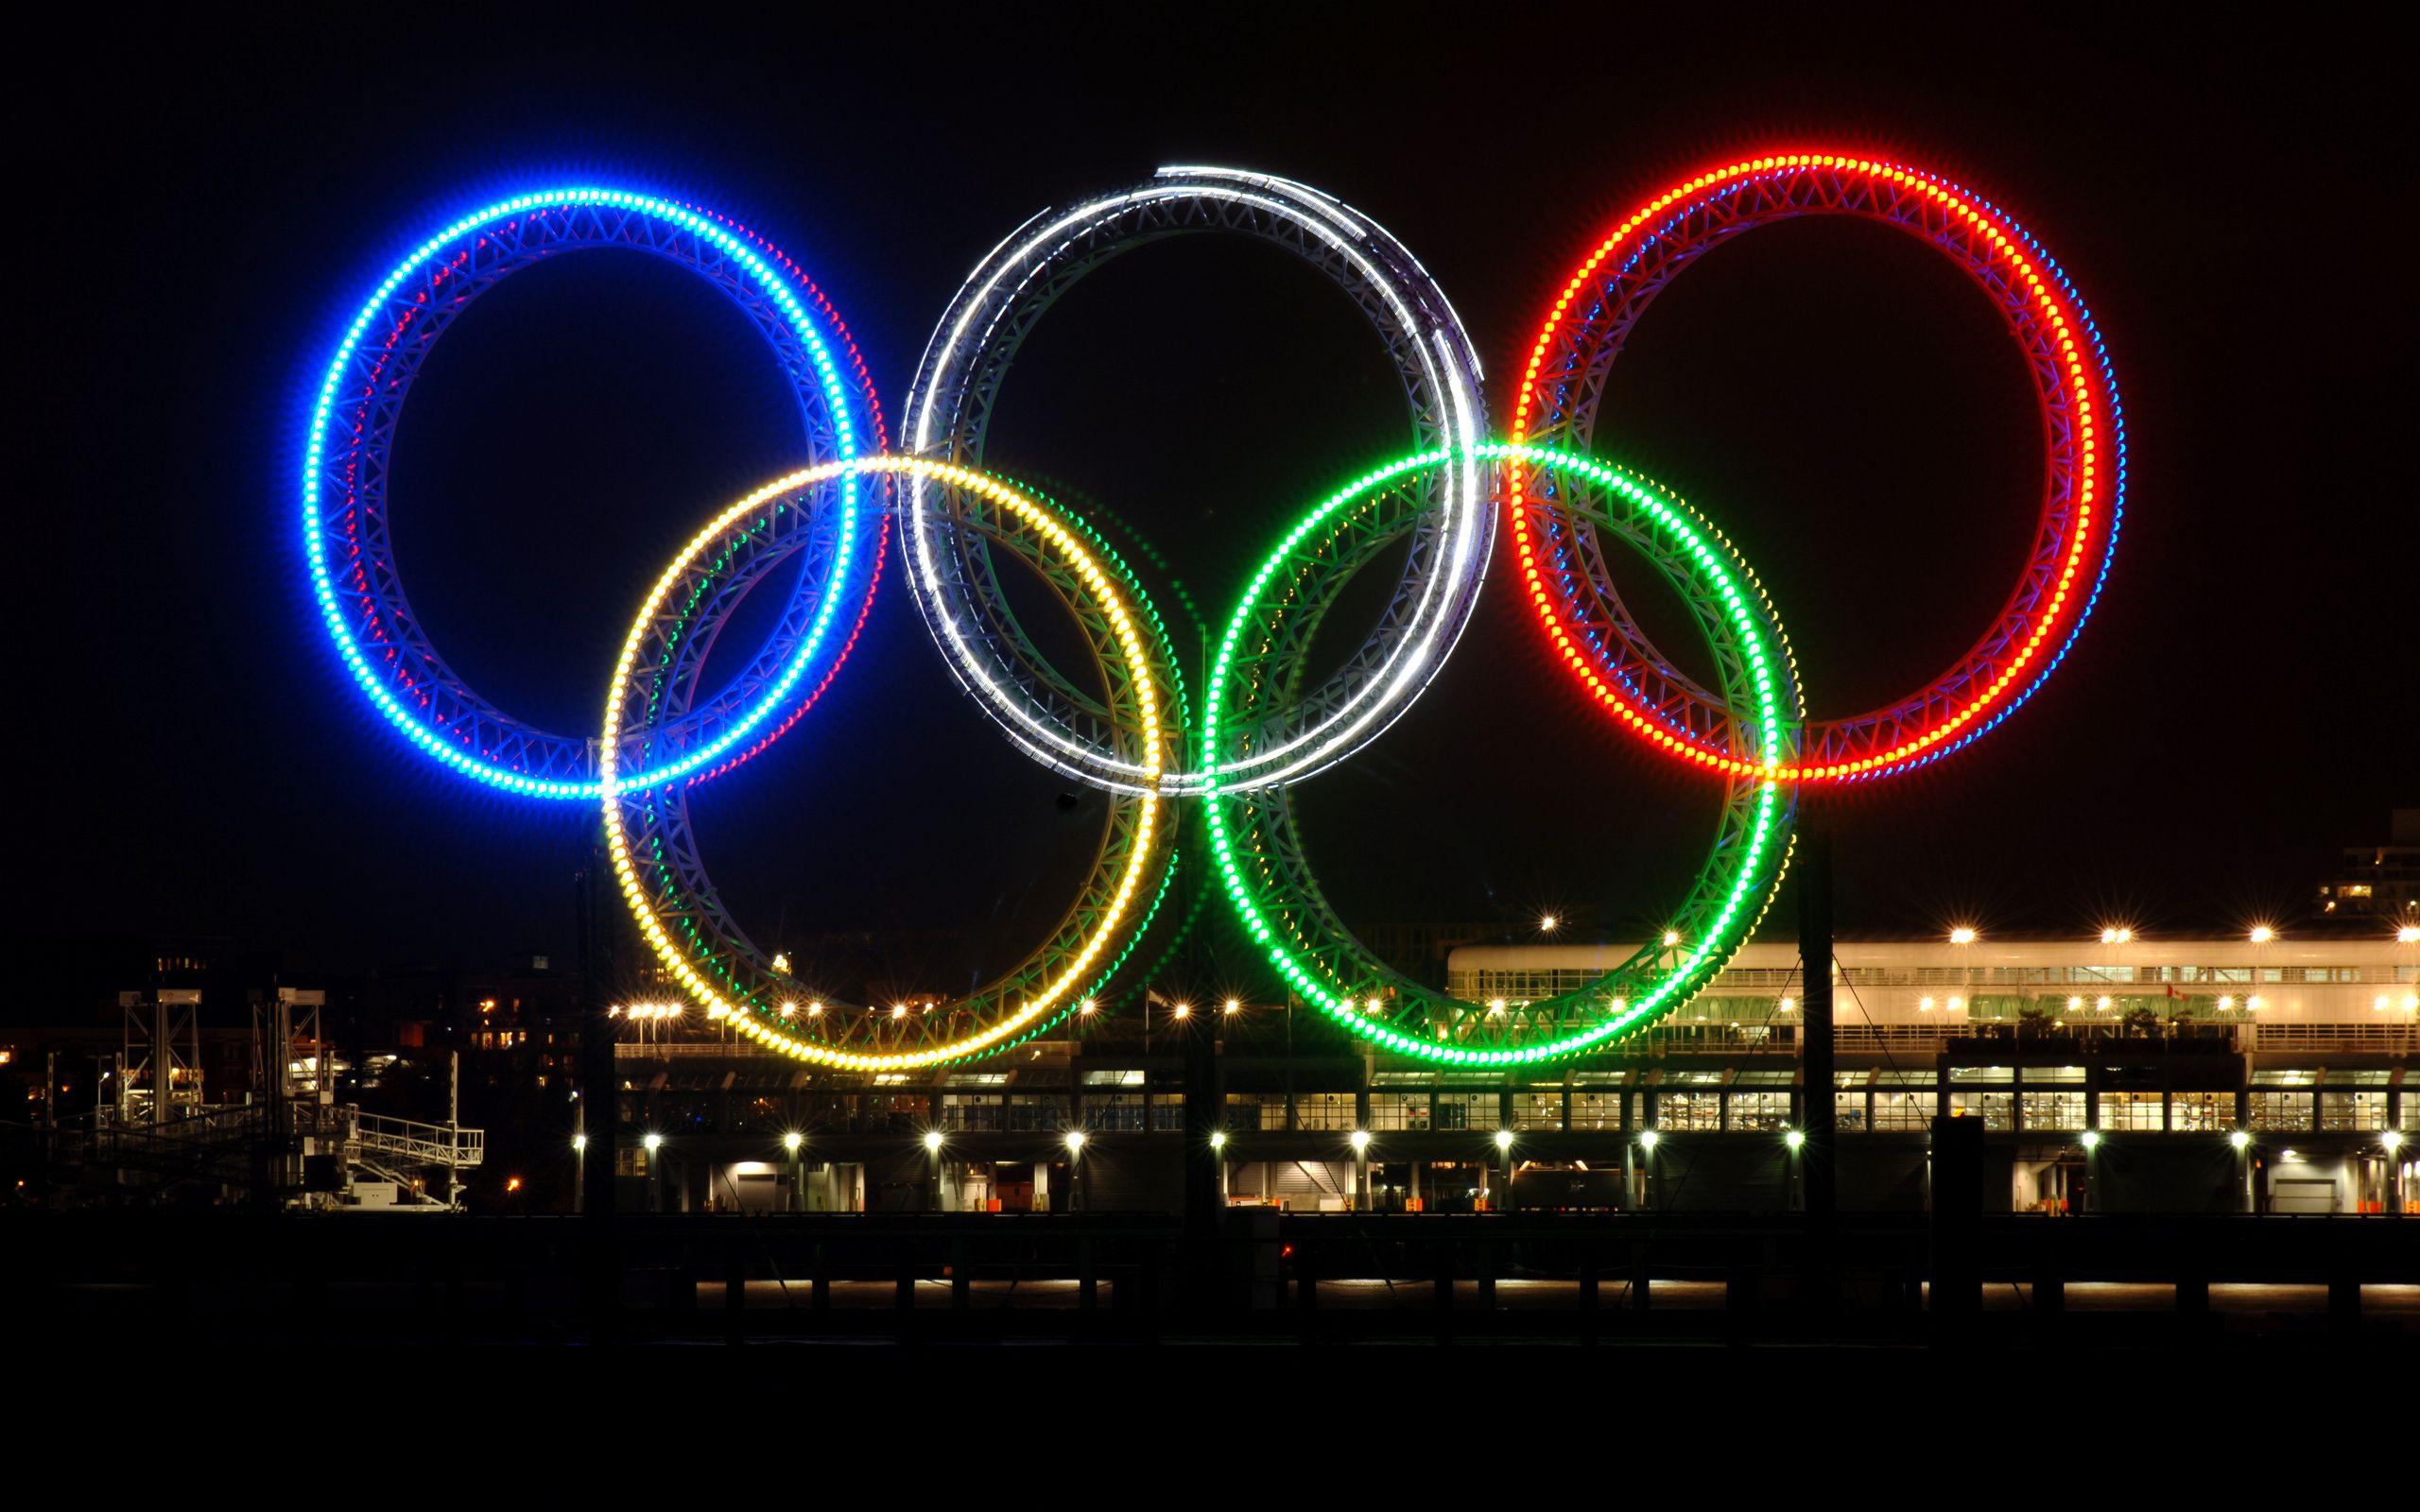 Olympic Games Wallpapers Top Free Olympic Games Backgrounds Wallpaperaccess